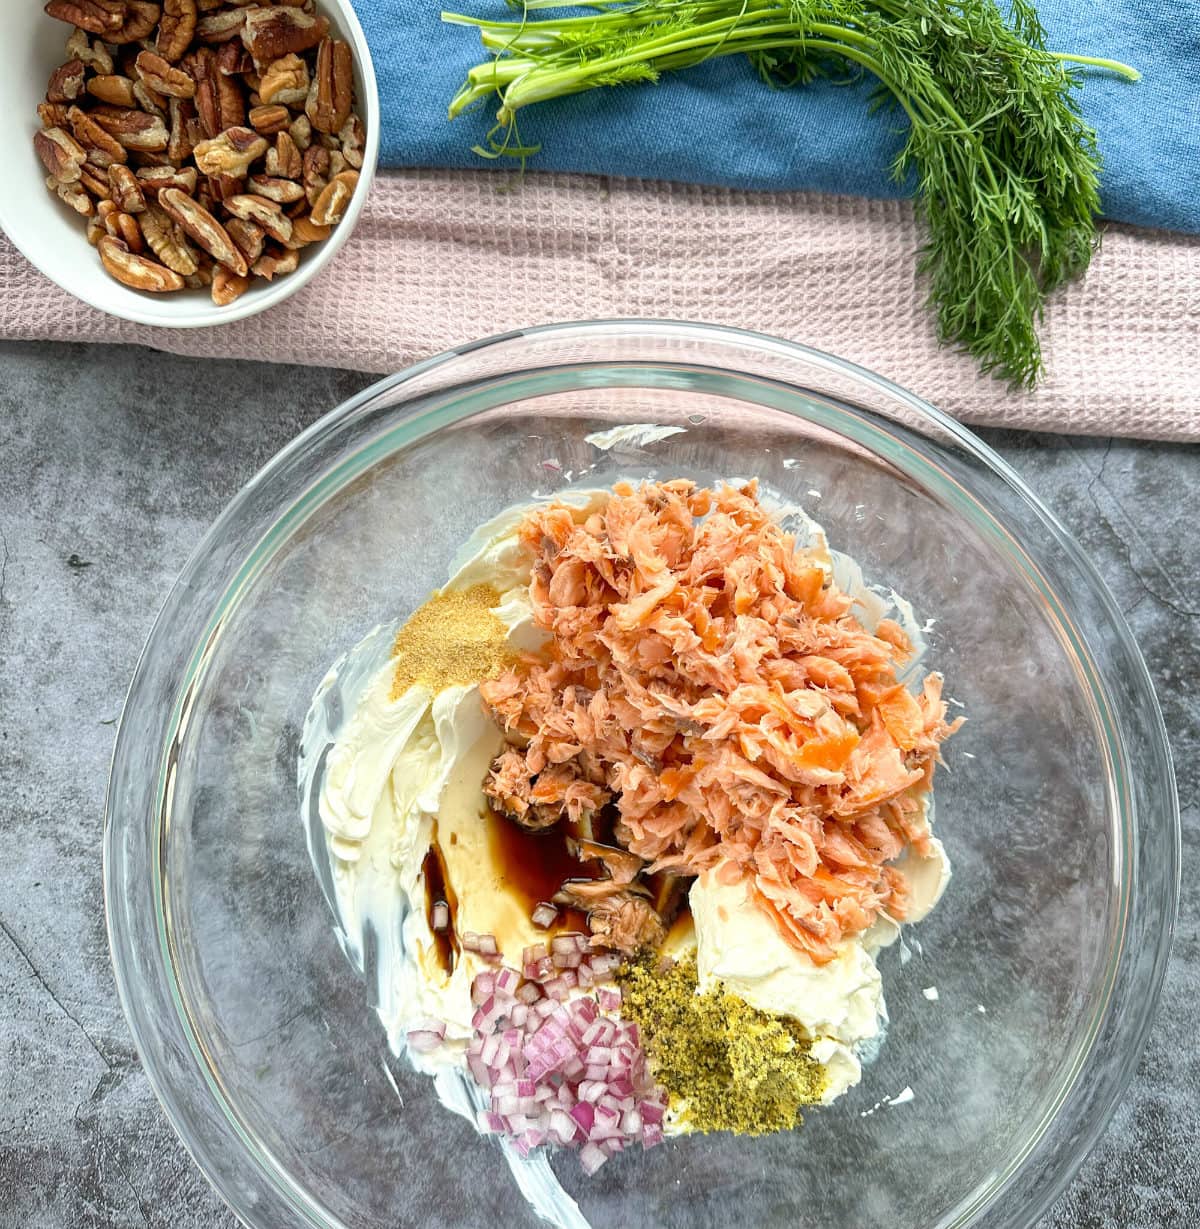 How to make a salmon cheeseball with flaked smoked salmon, mixed with other ingredients in a clear glass bowl